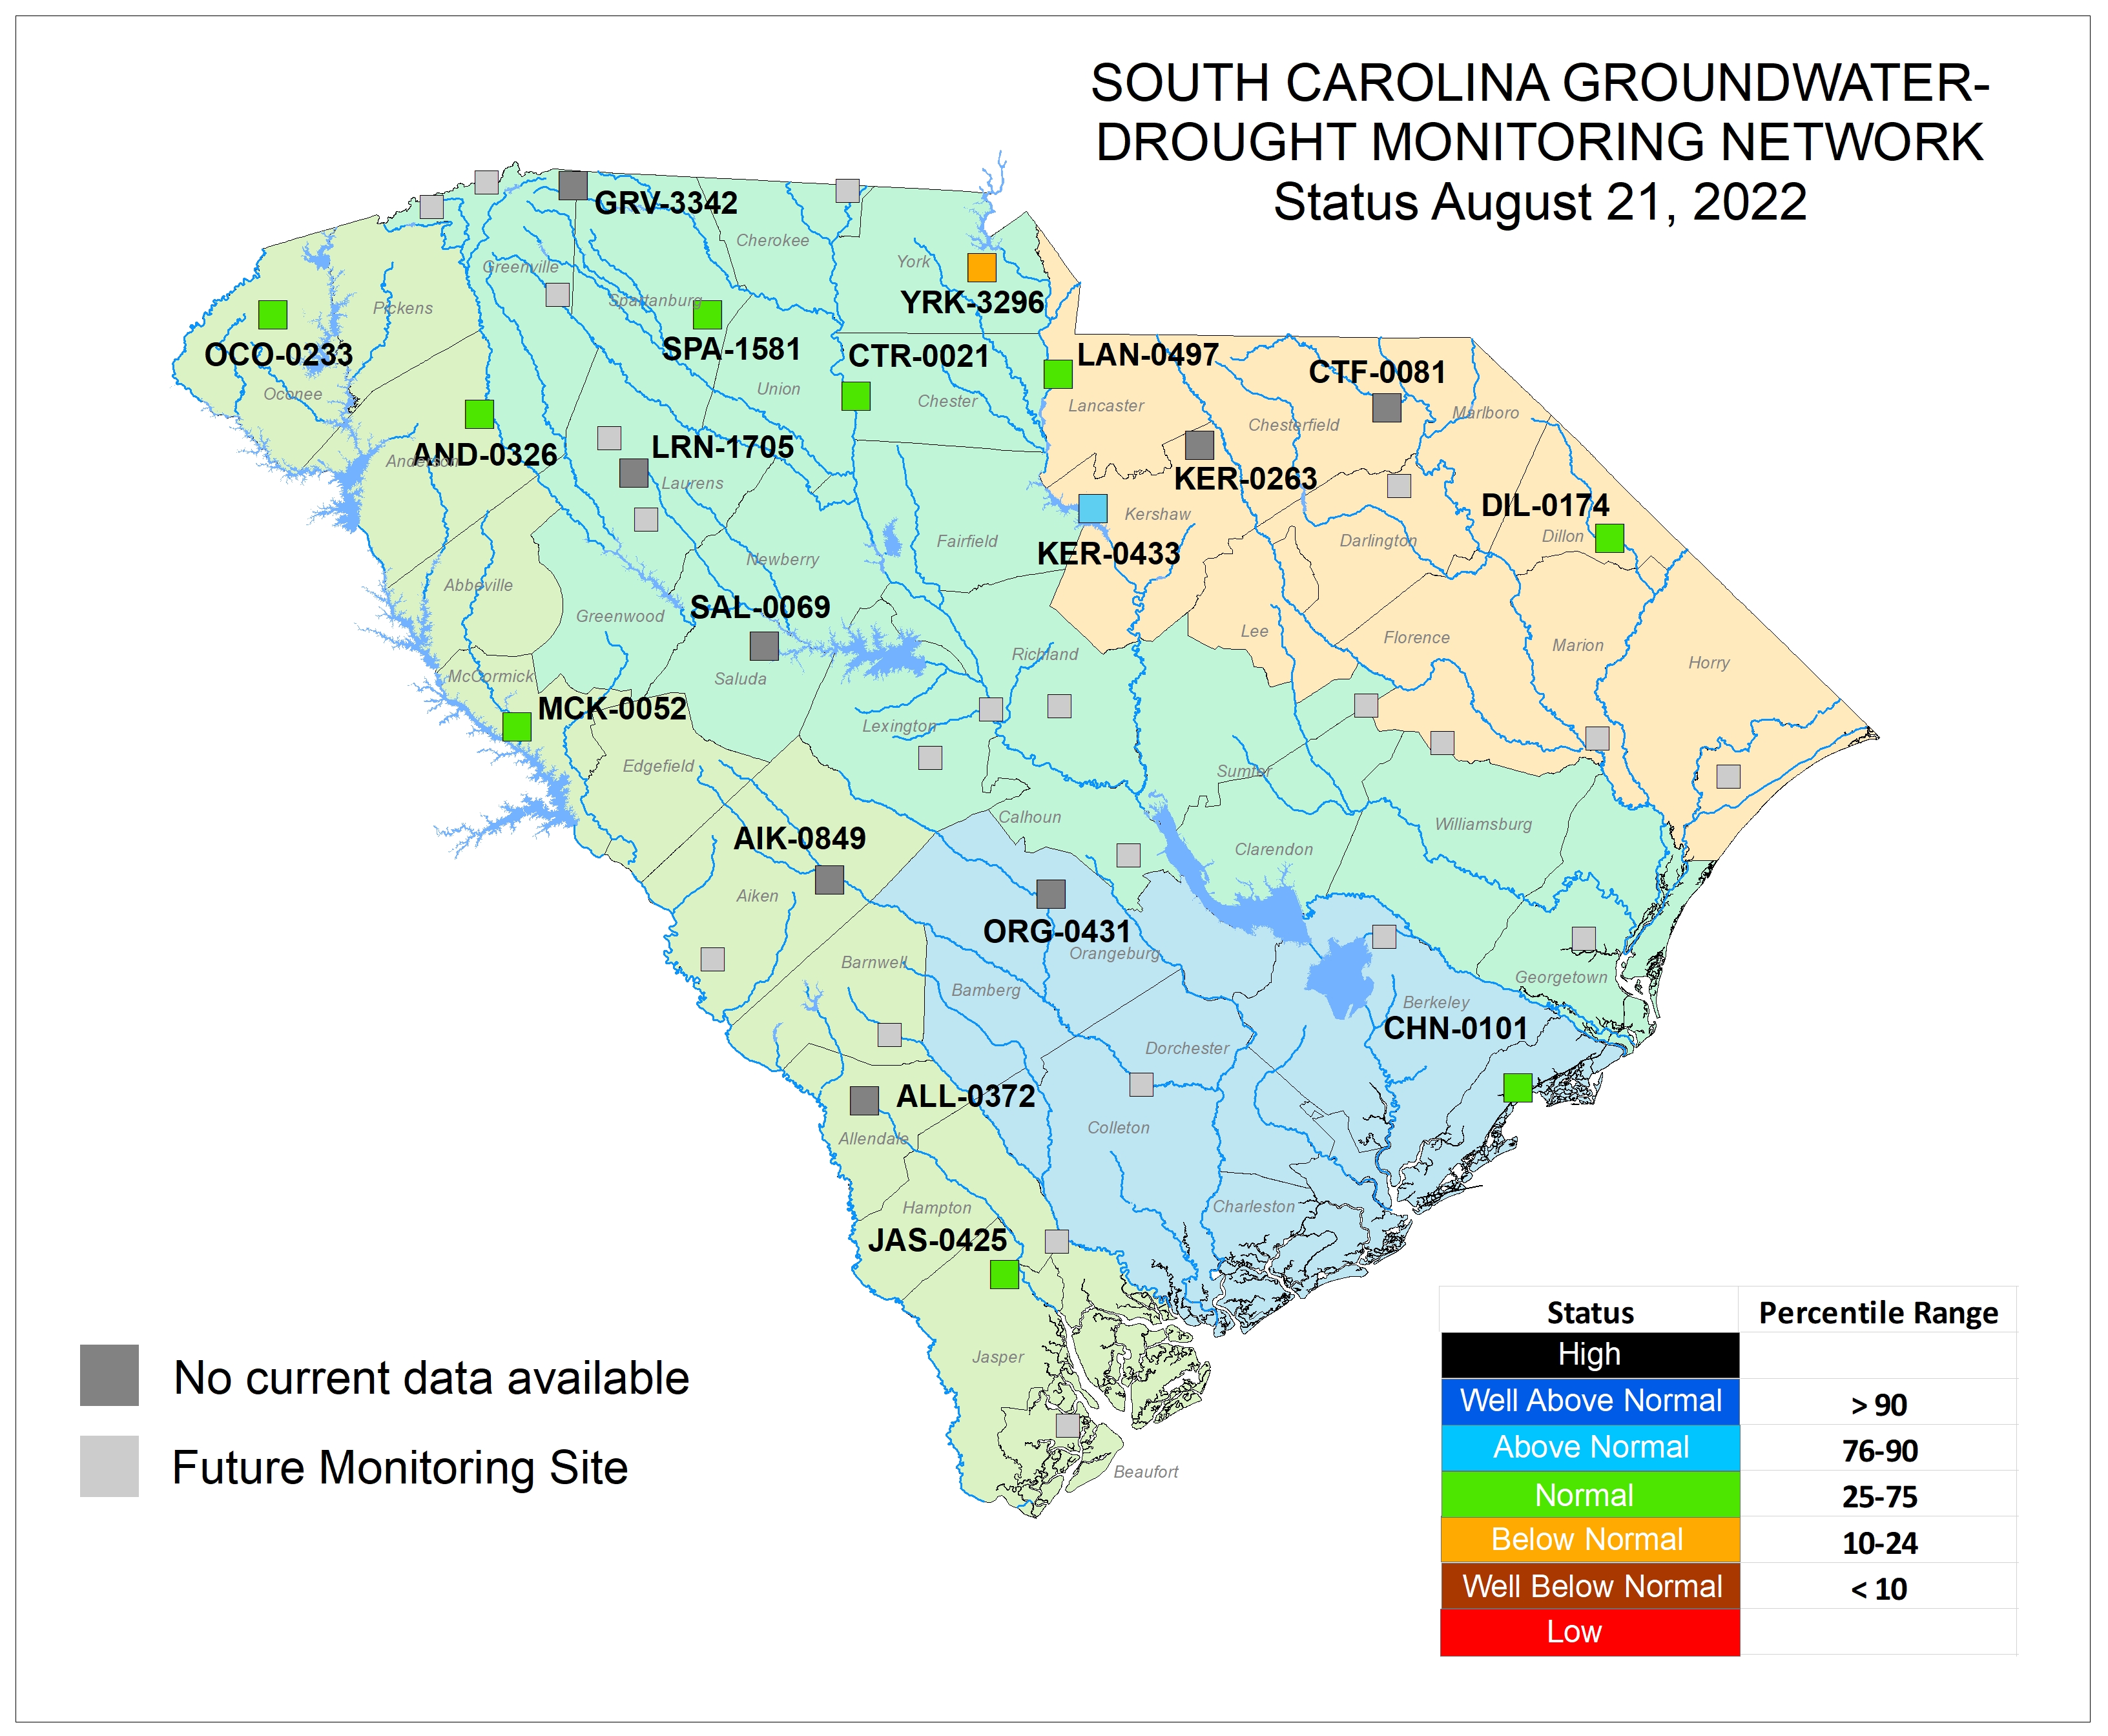 Groundwater Drought Monitoring Network